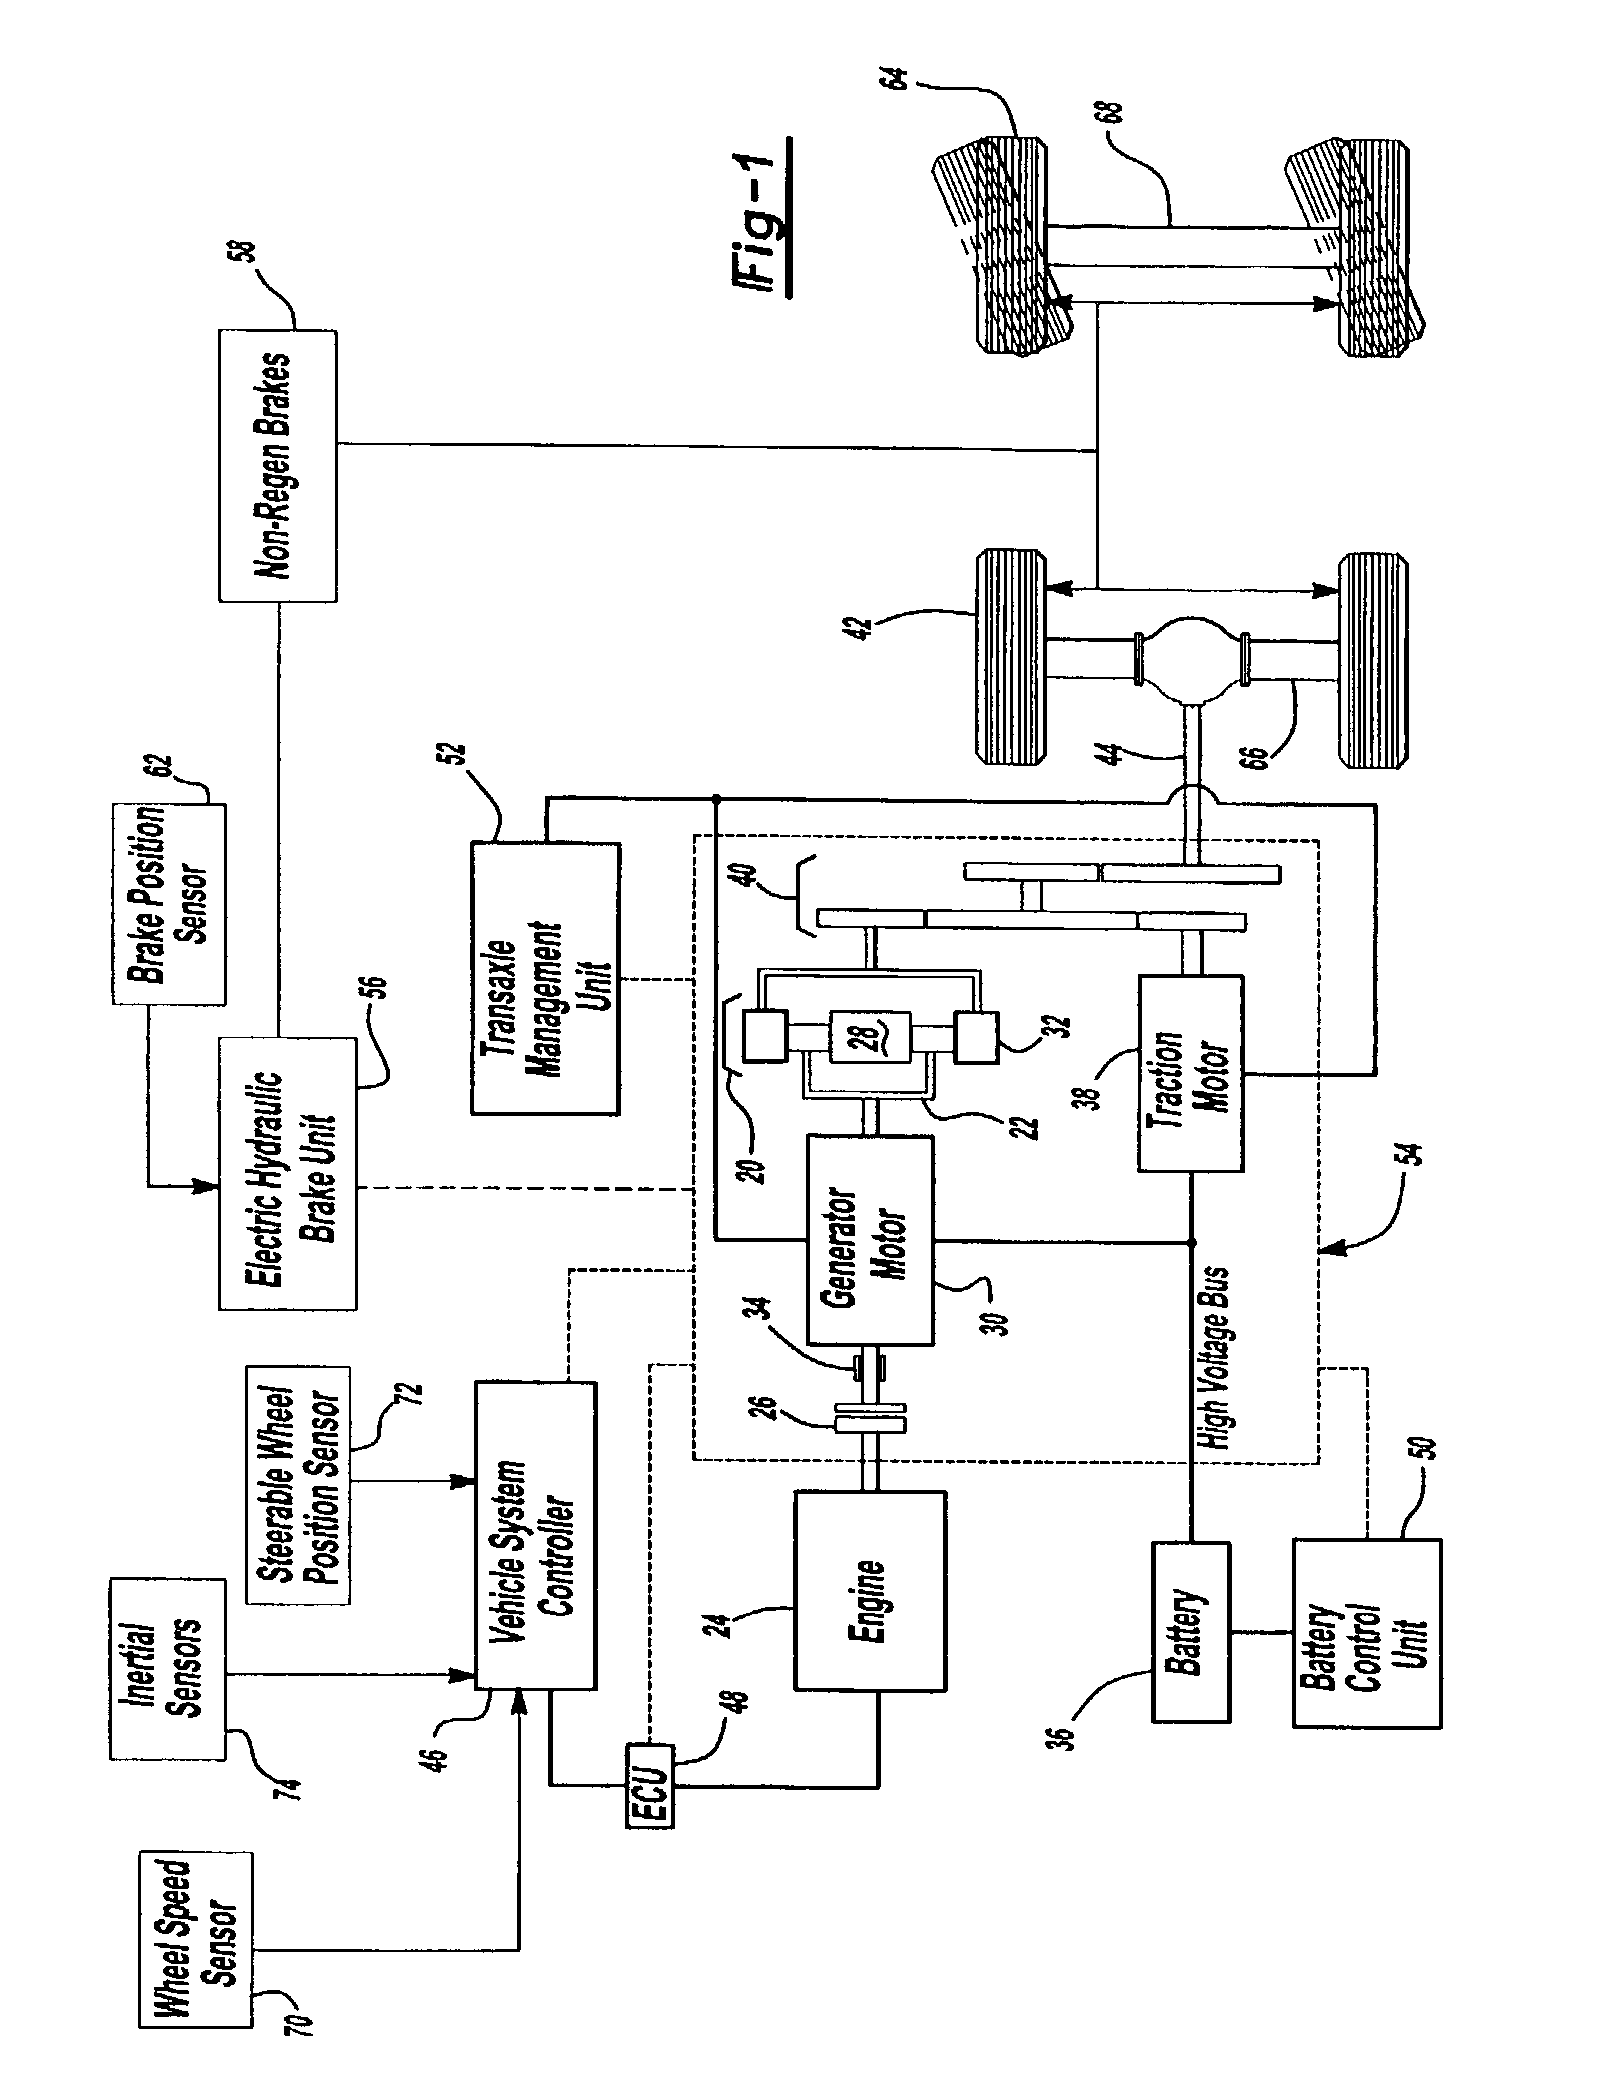 Independent braking and controllability control method and system for a vehicle with regenerative braking